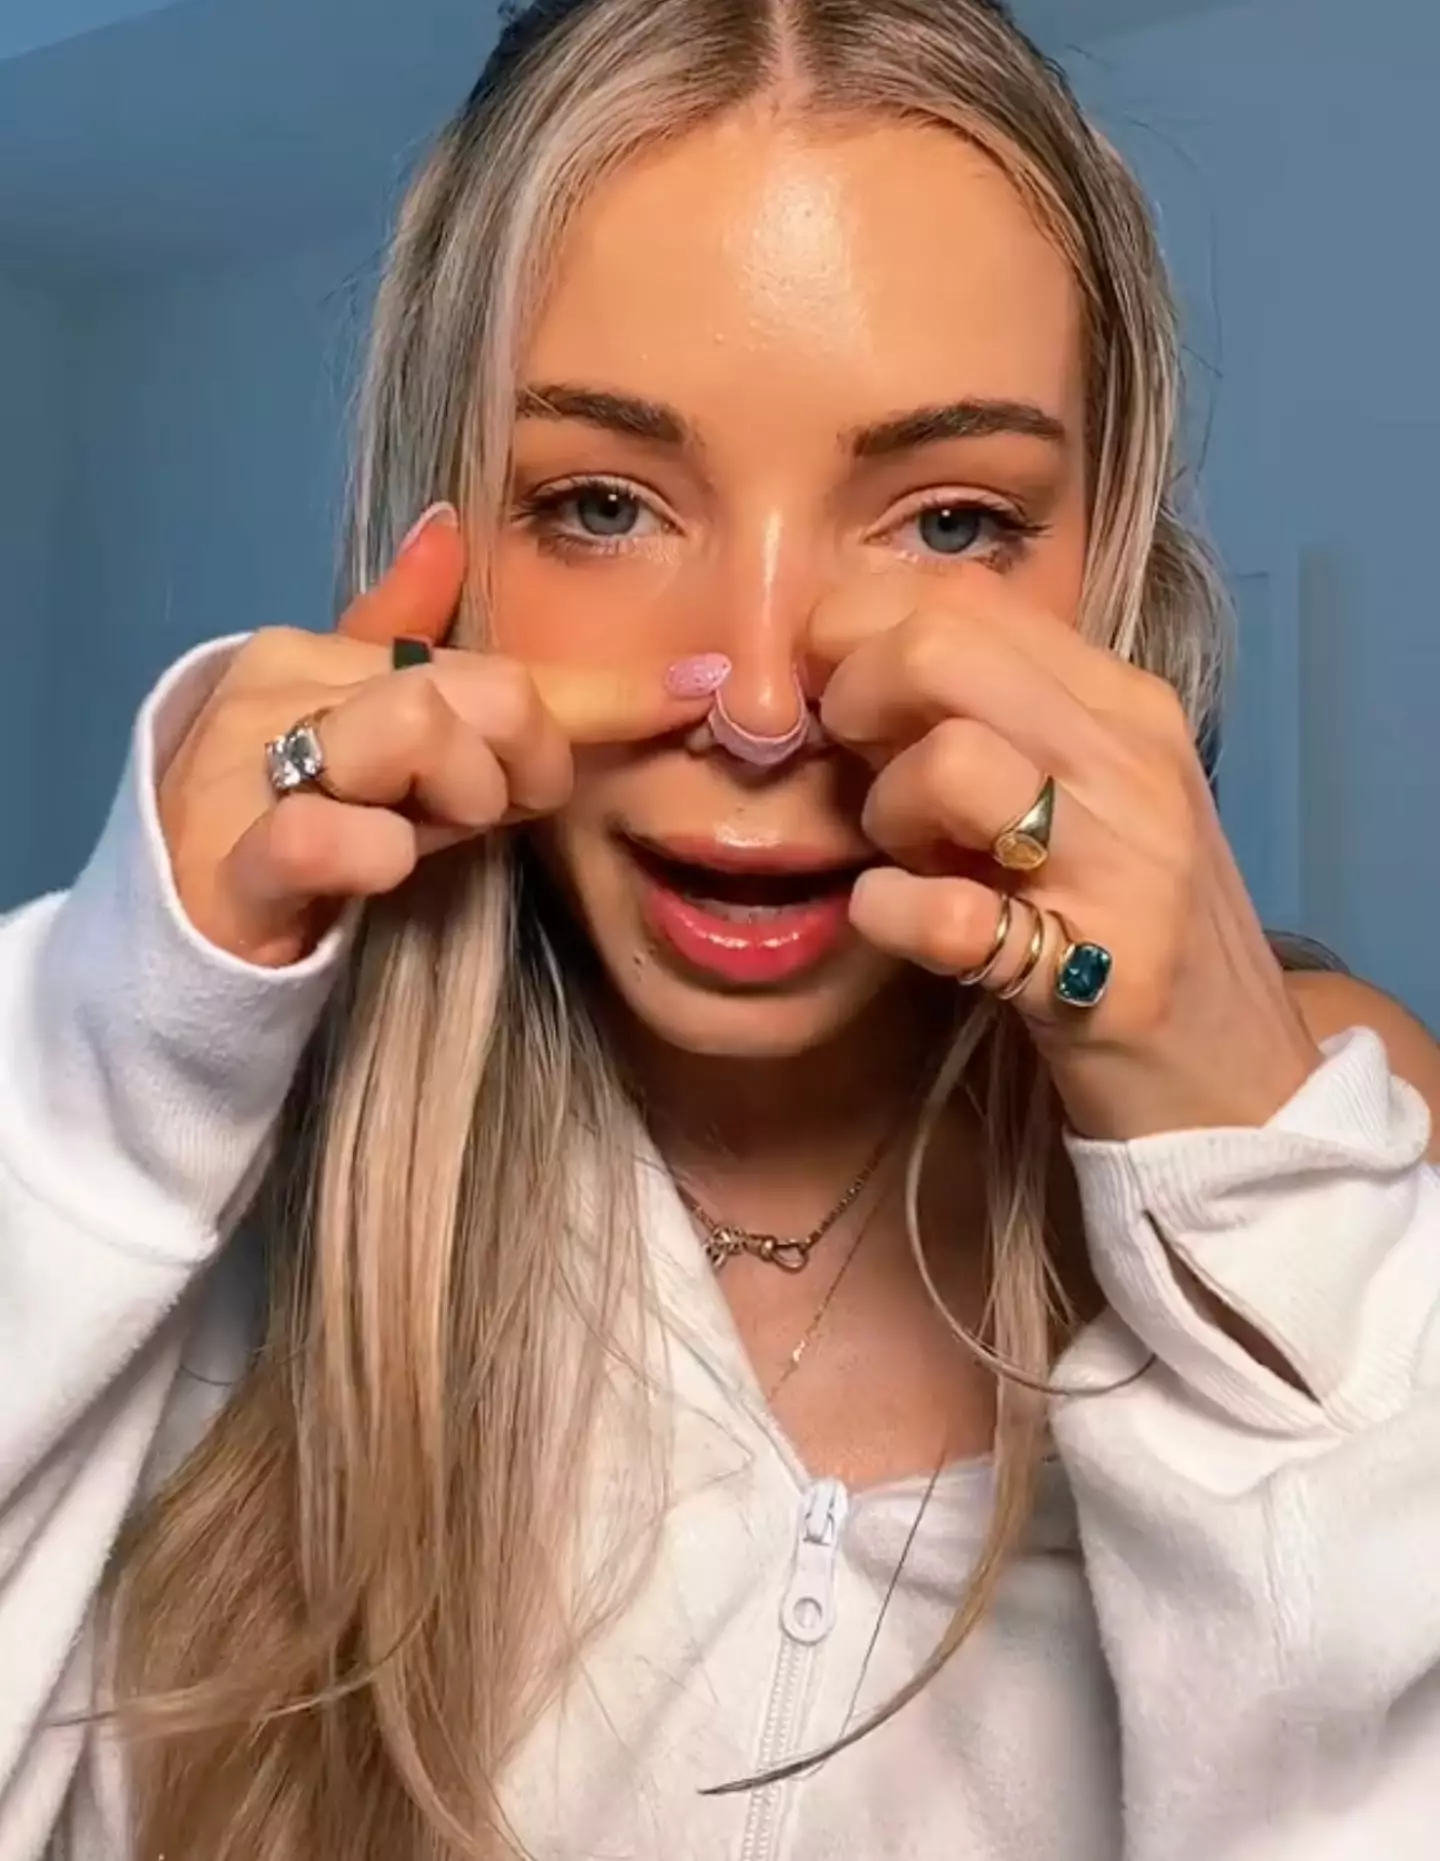 Isabelle shared the details of her mini nose job hack with her TikTok followers.